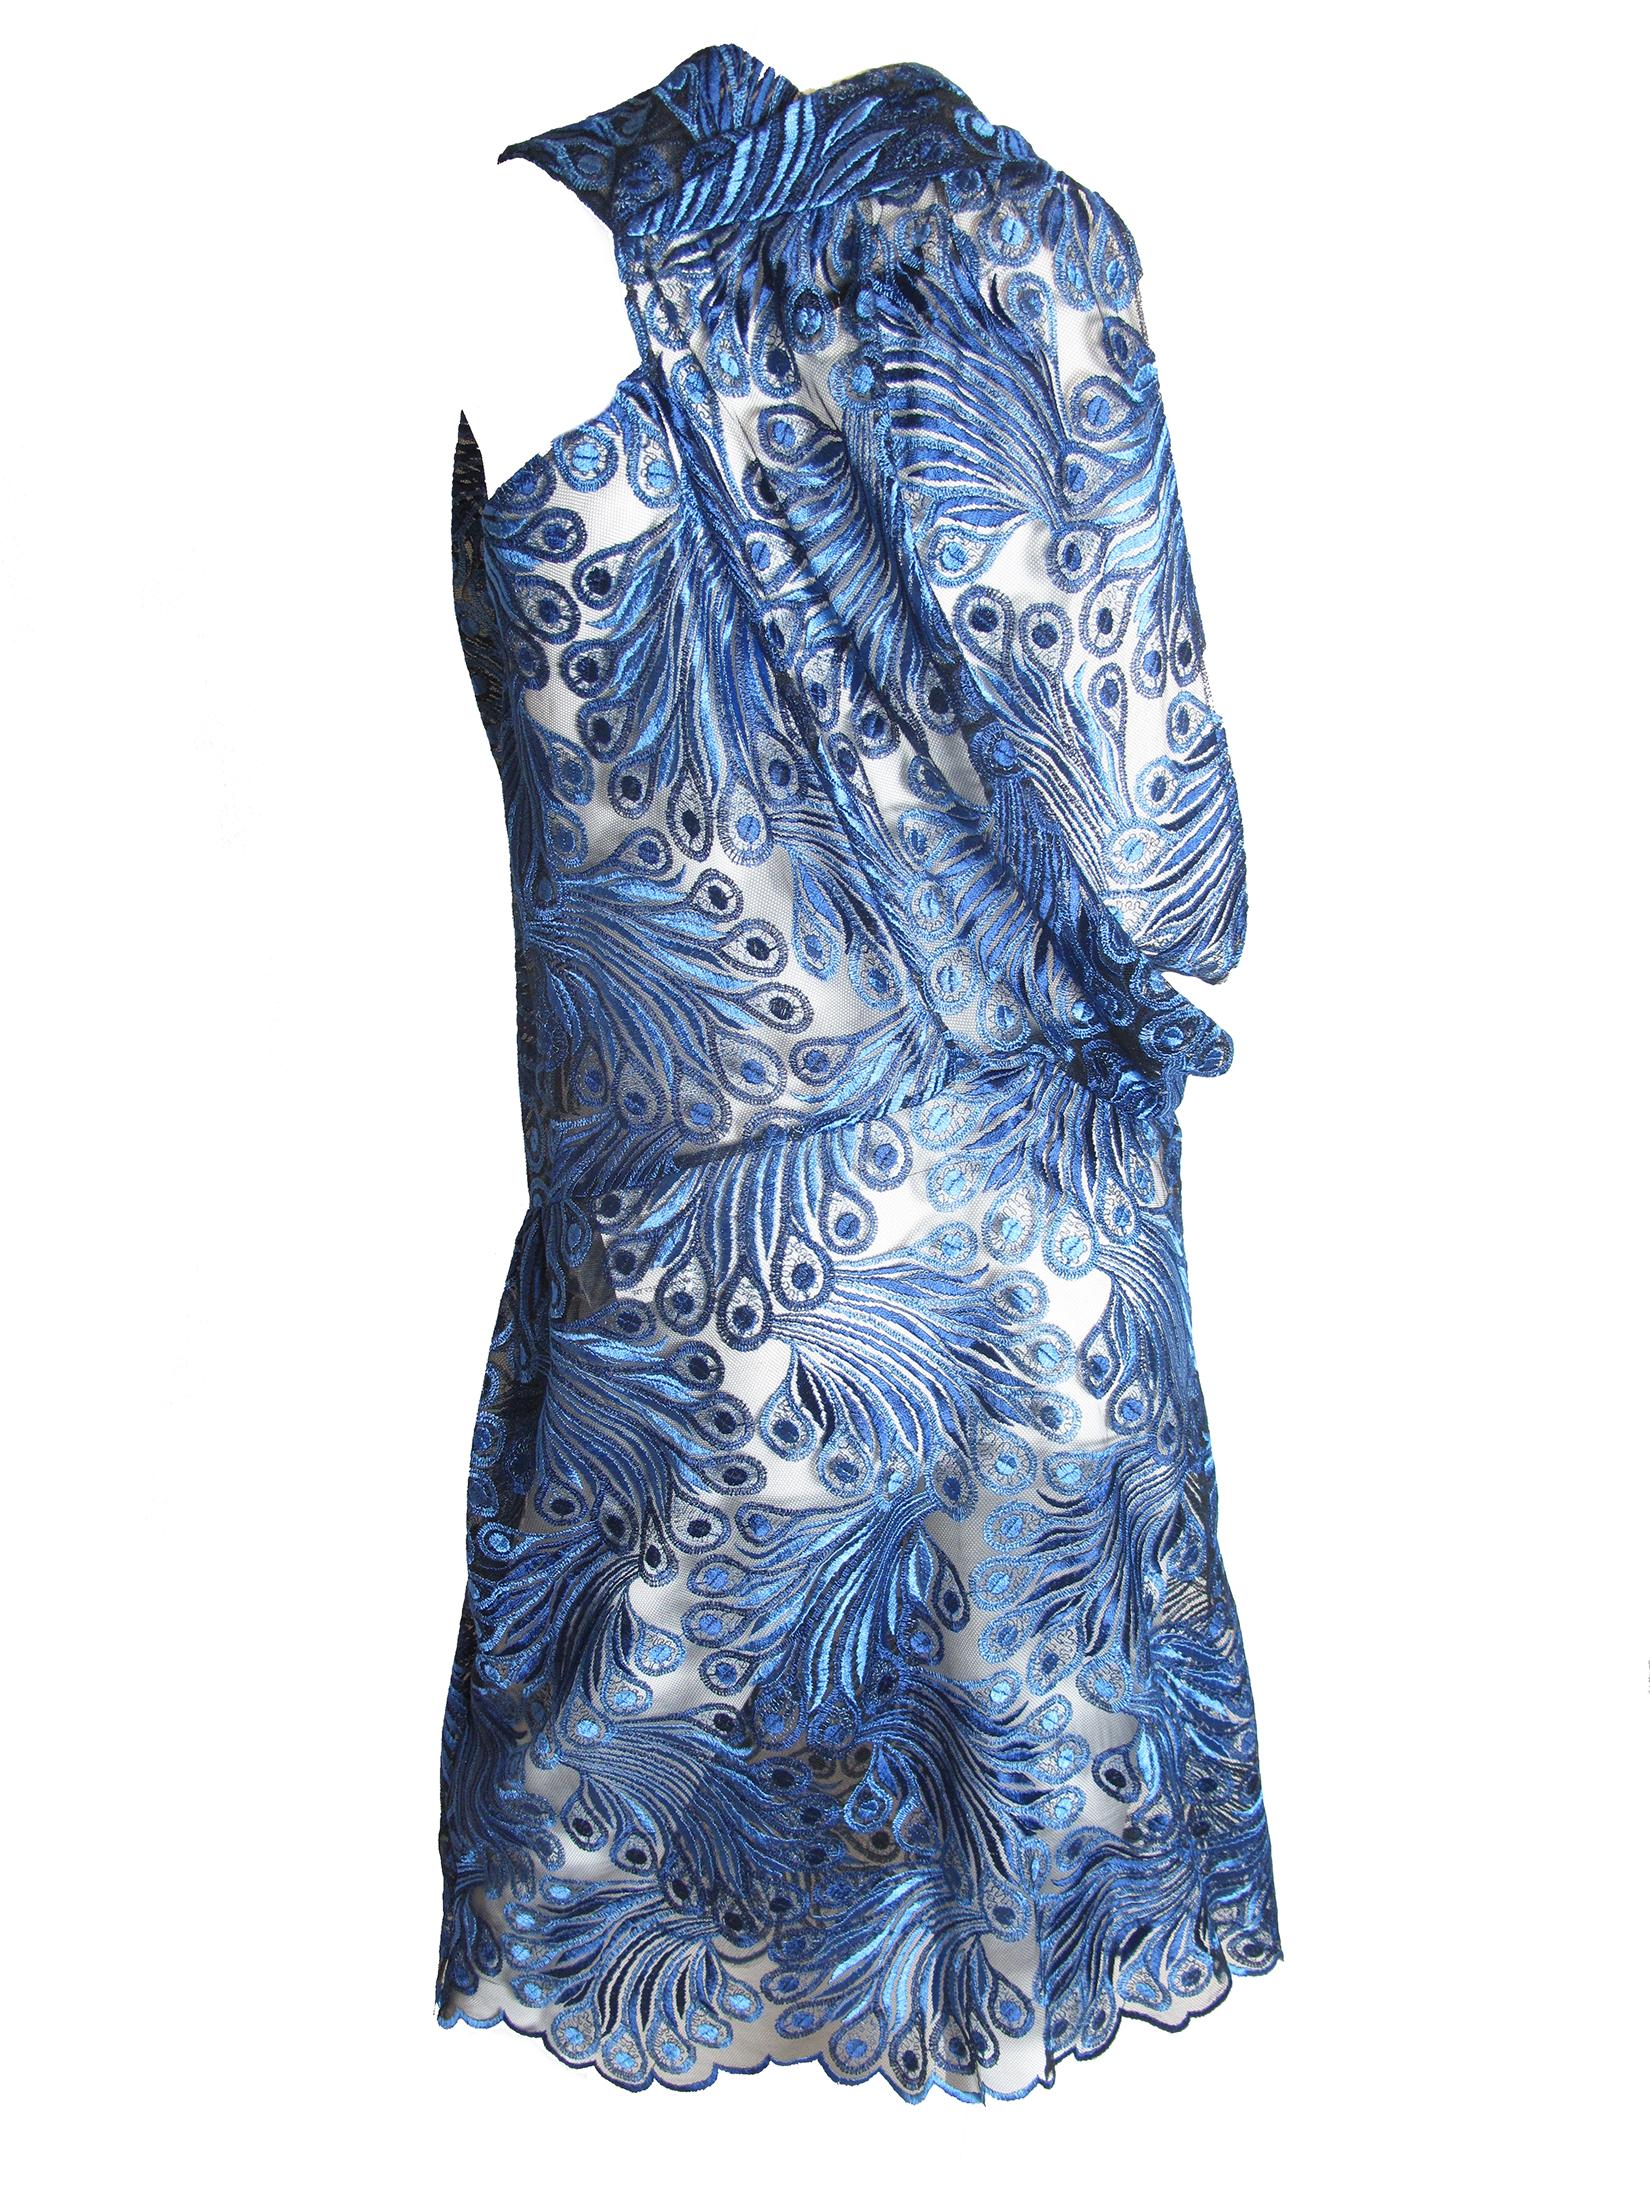 JUNYA WATANABE for Comme des Garcons, Blue Lace Dress runway, 2011. Condition: Excellent. Size M